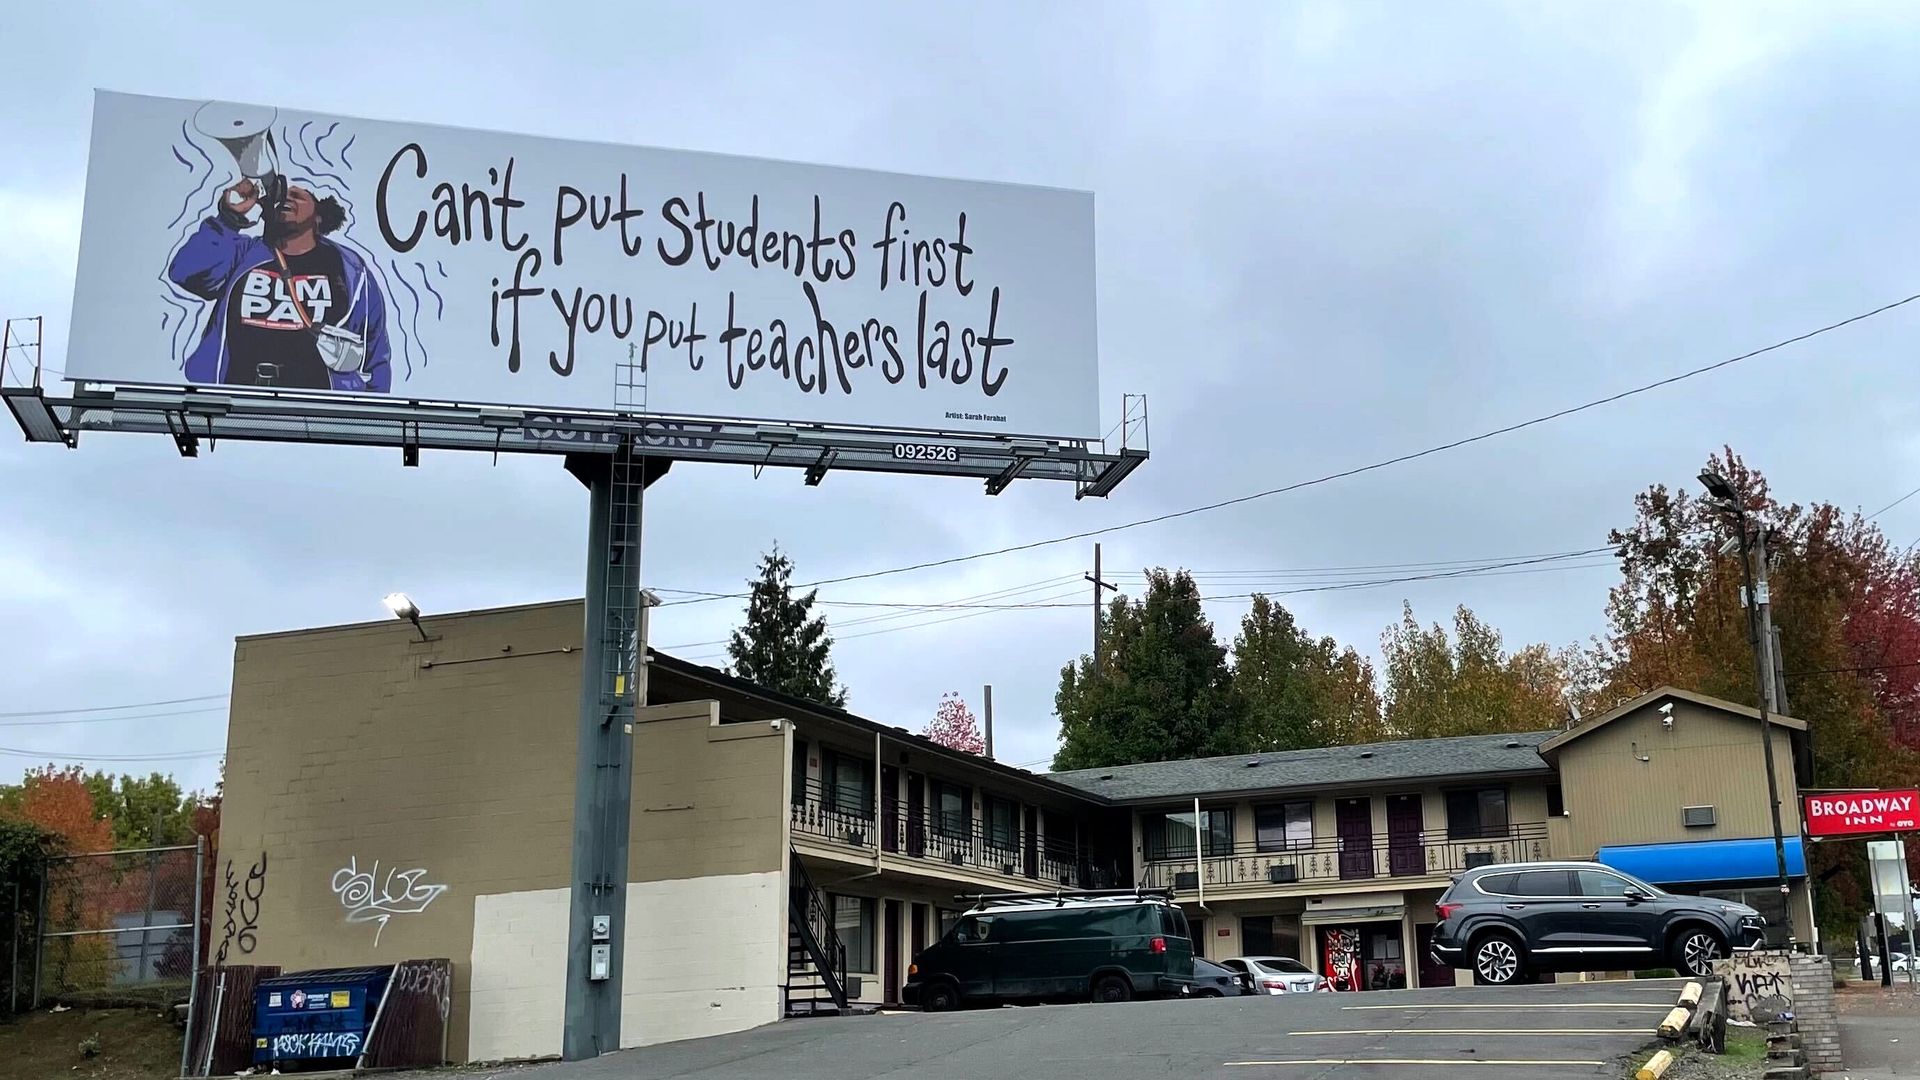 A billboard that says "Can't put students first if you put teachers last" and shows an image of the president of the Portland, Oregon teachers union speaking through a billboard.